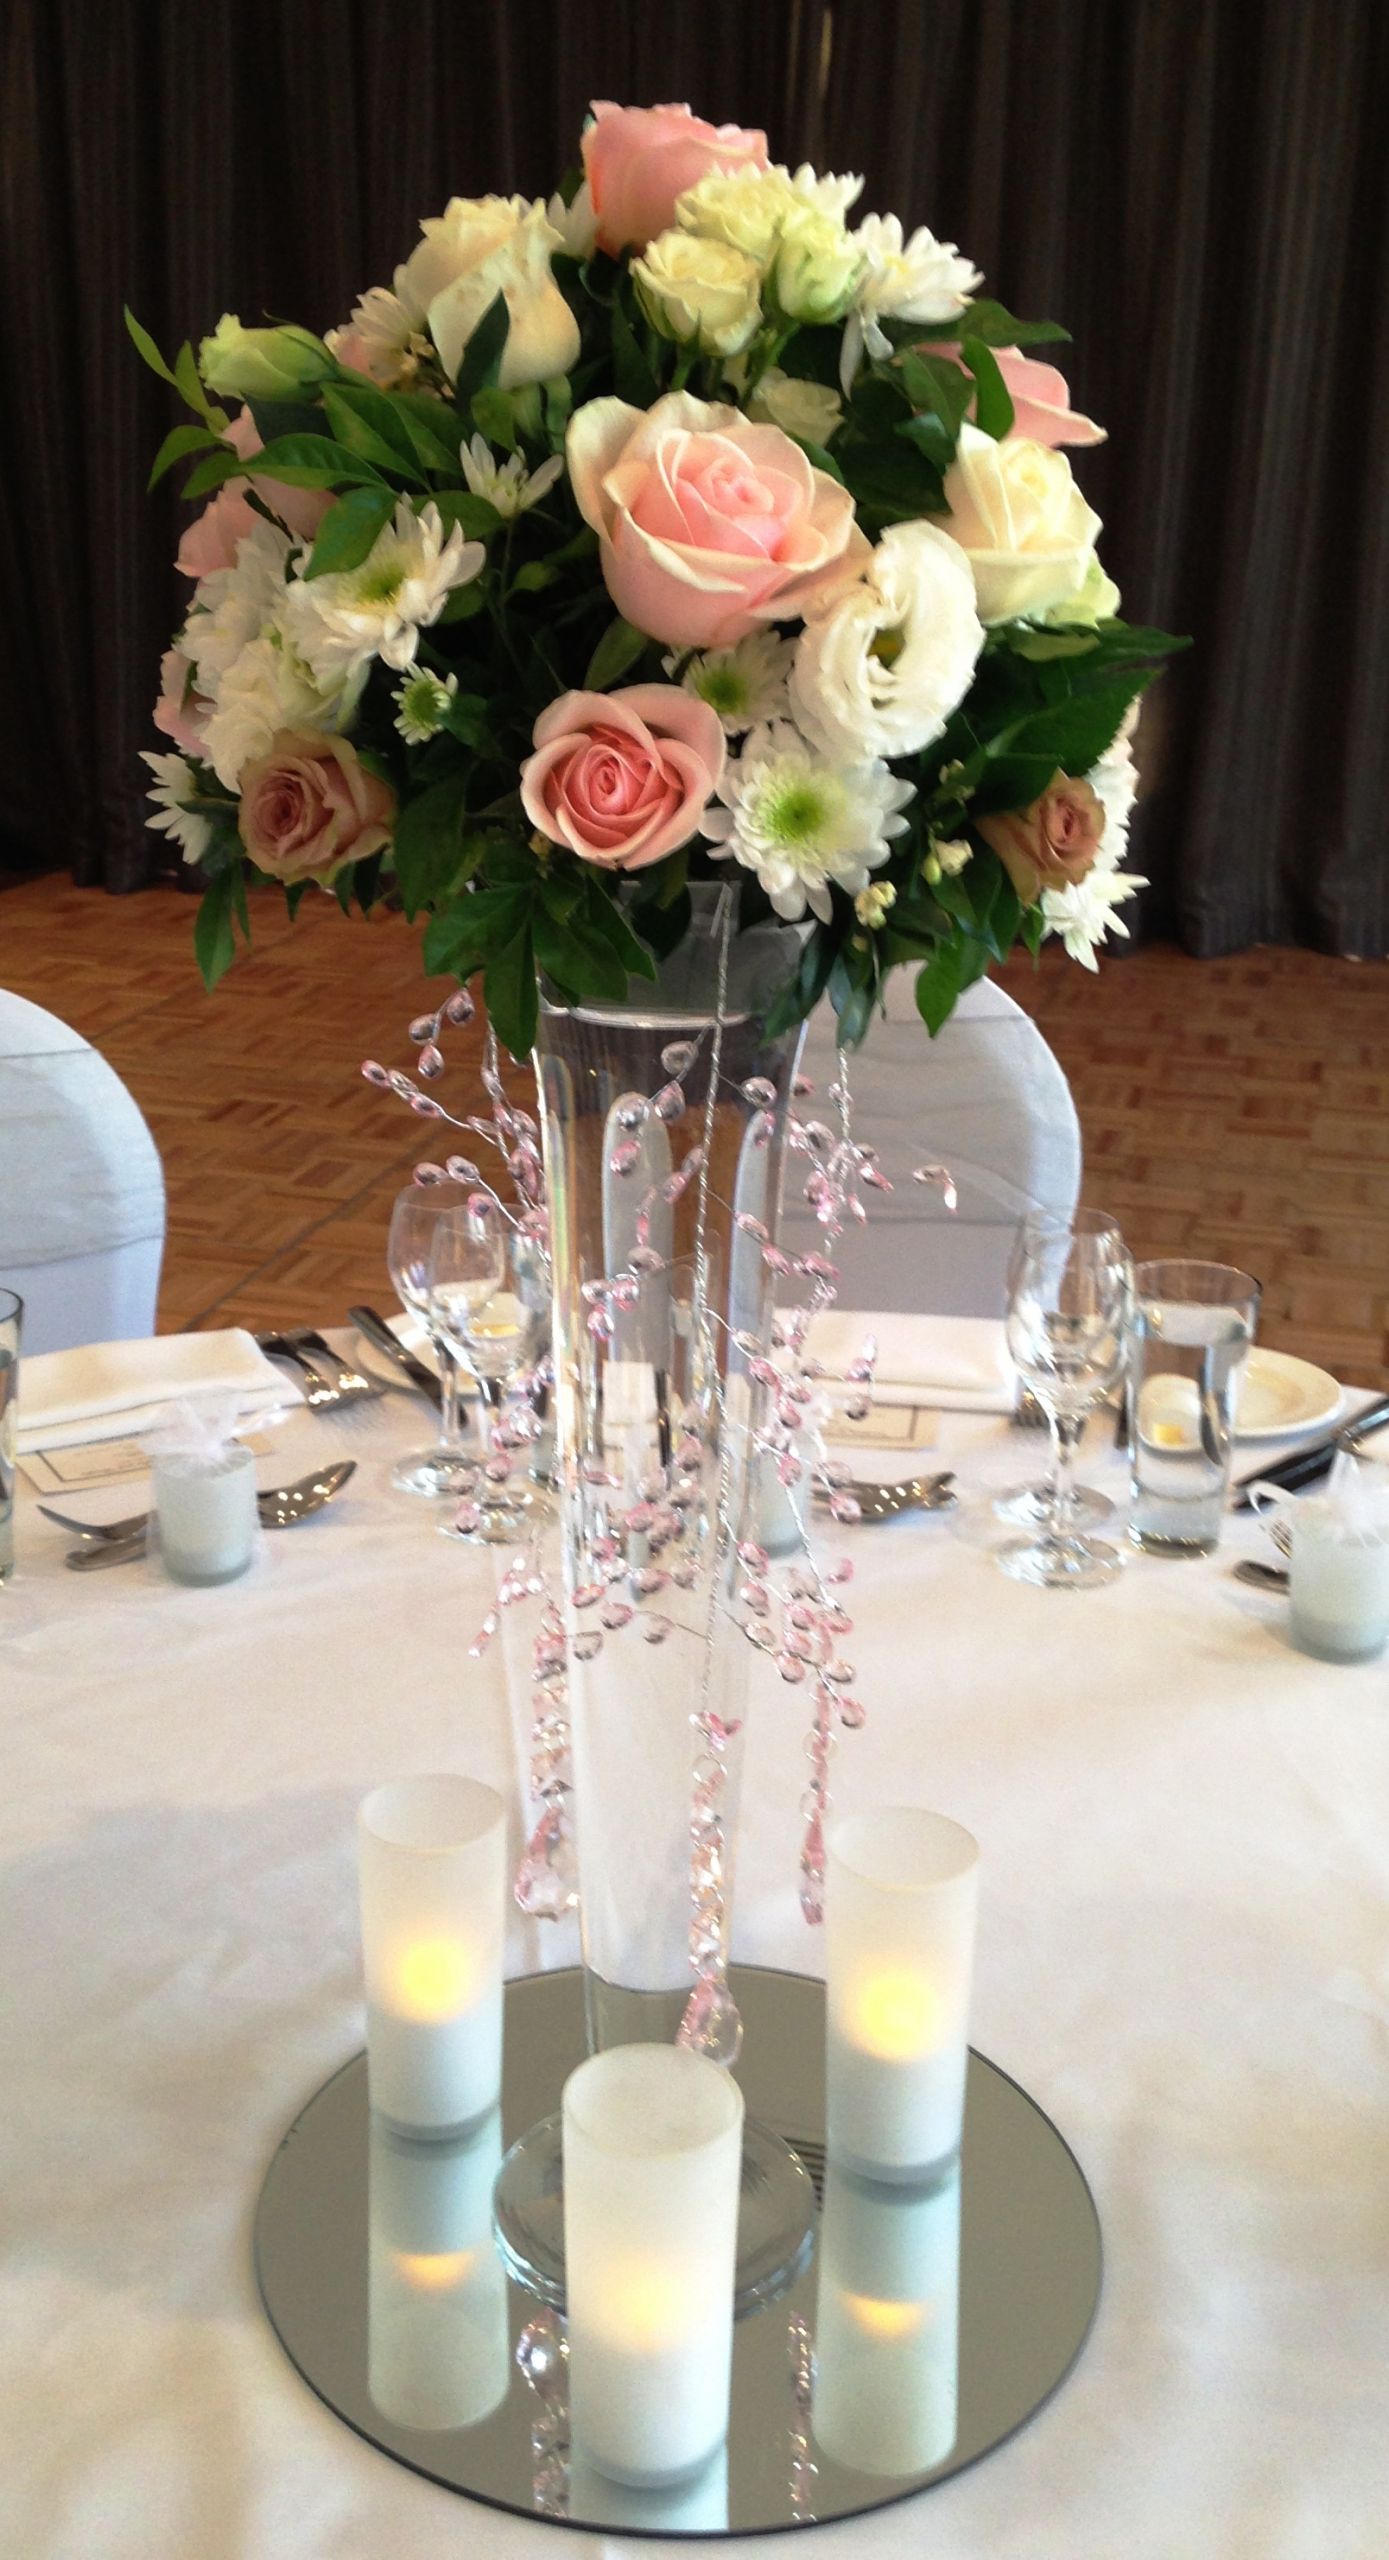 Wedding-flowers-and-reception-ideas
 Congratulations to Kylie Bro